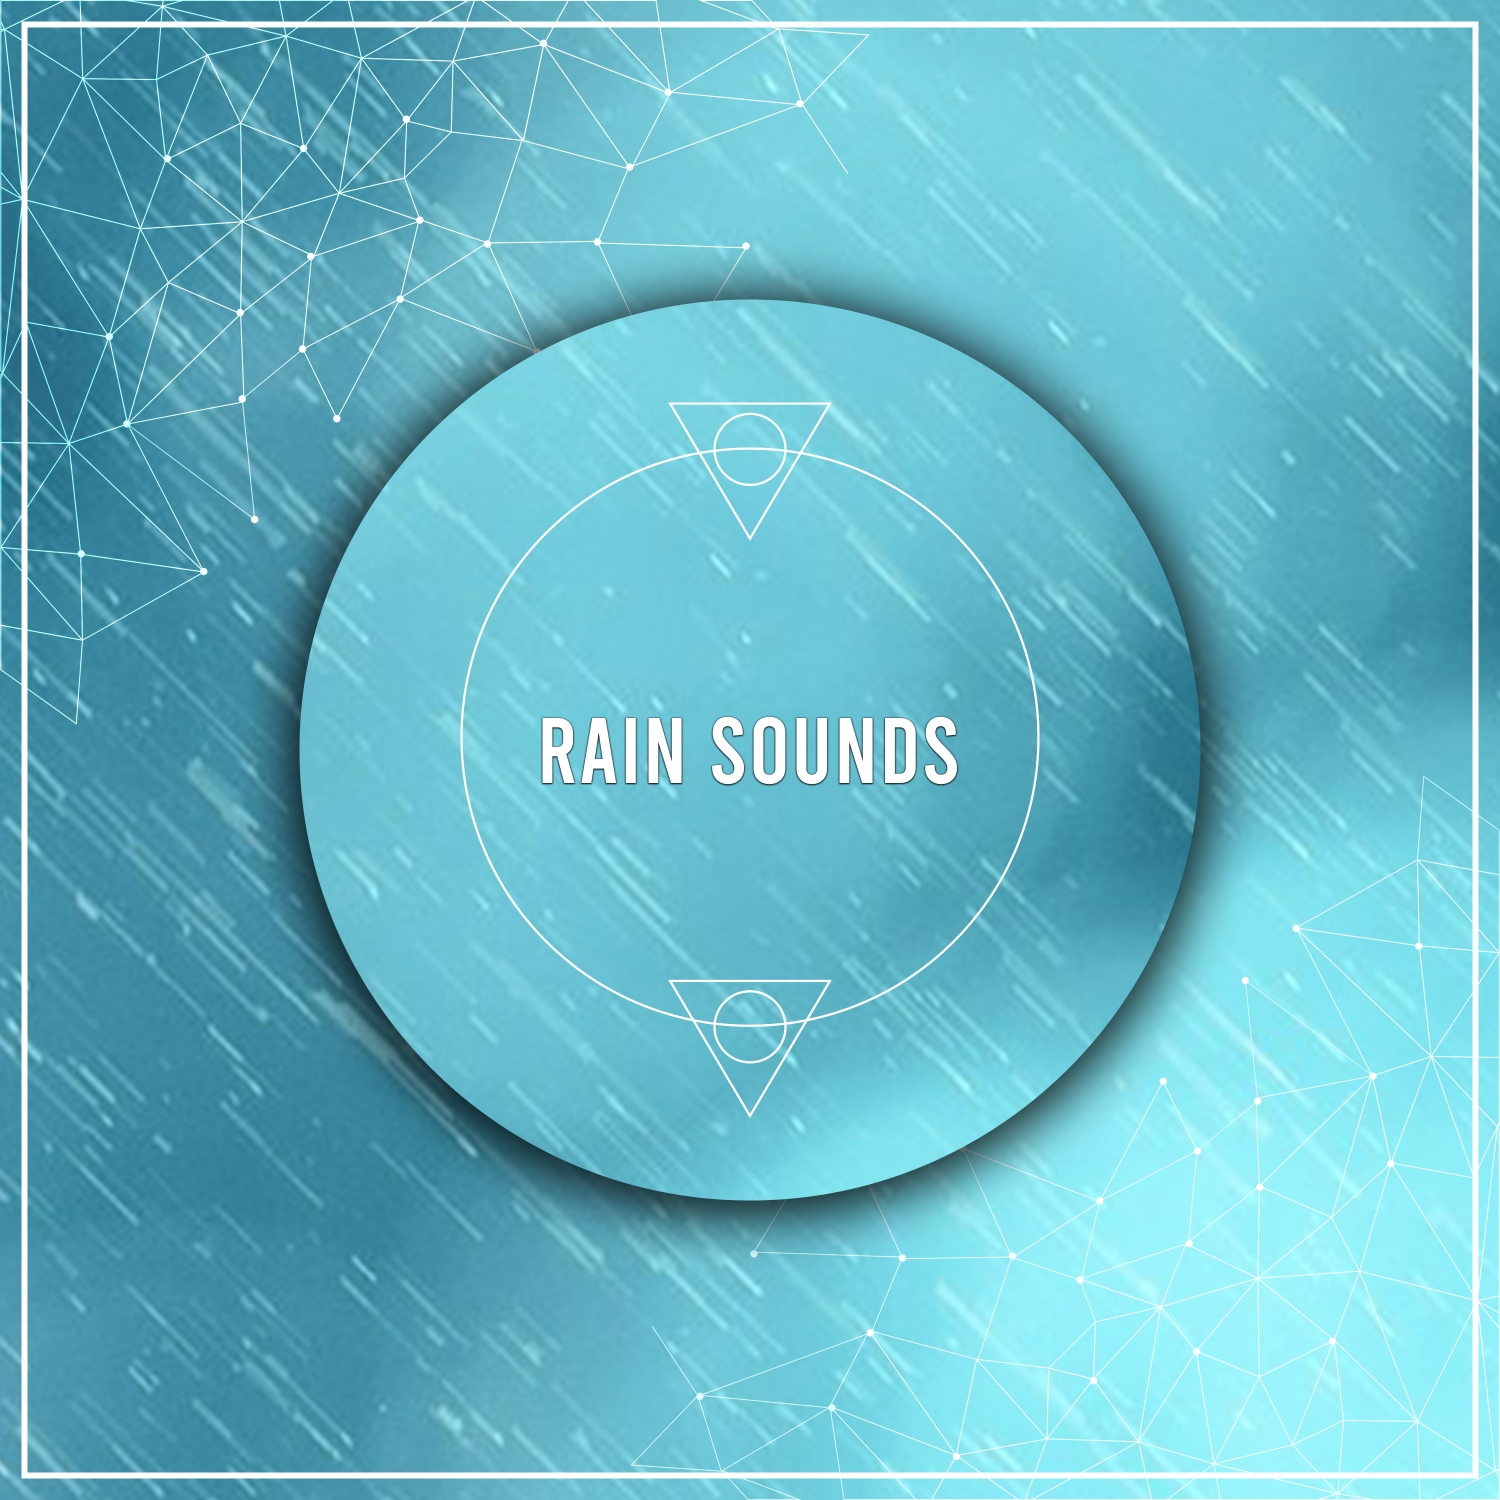 12 Spa Rain and Relaxing Nature Sounds - White Noise Meditation